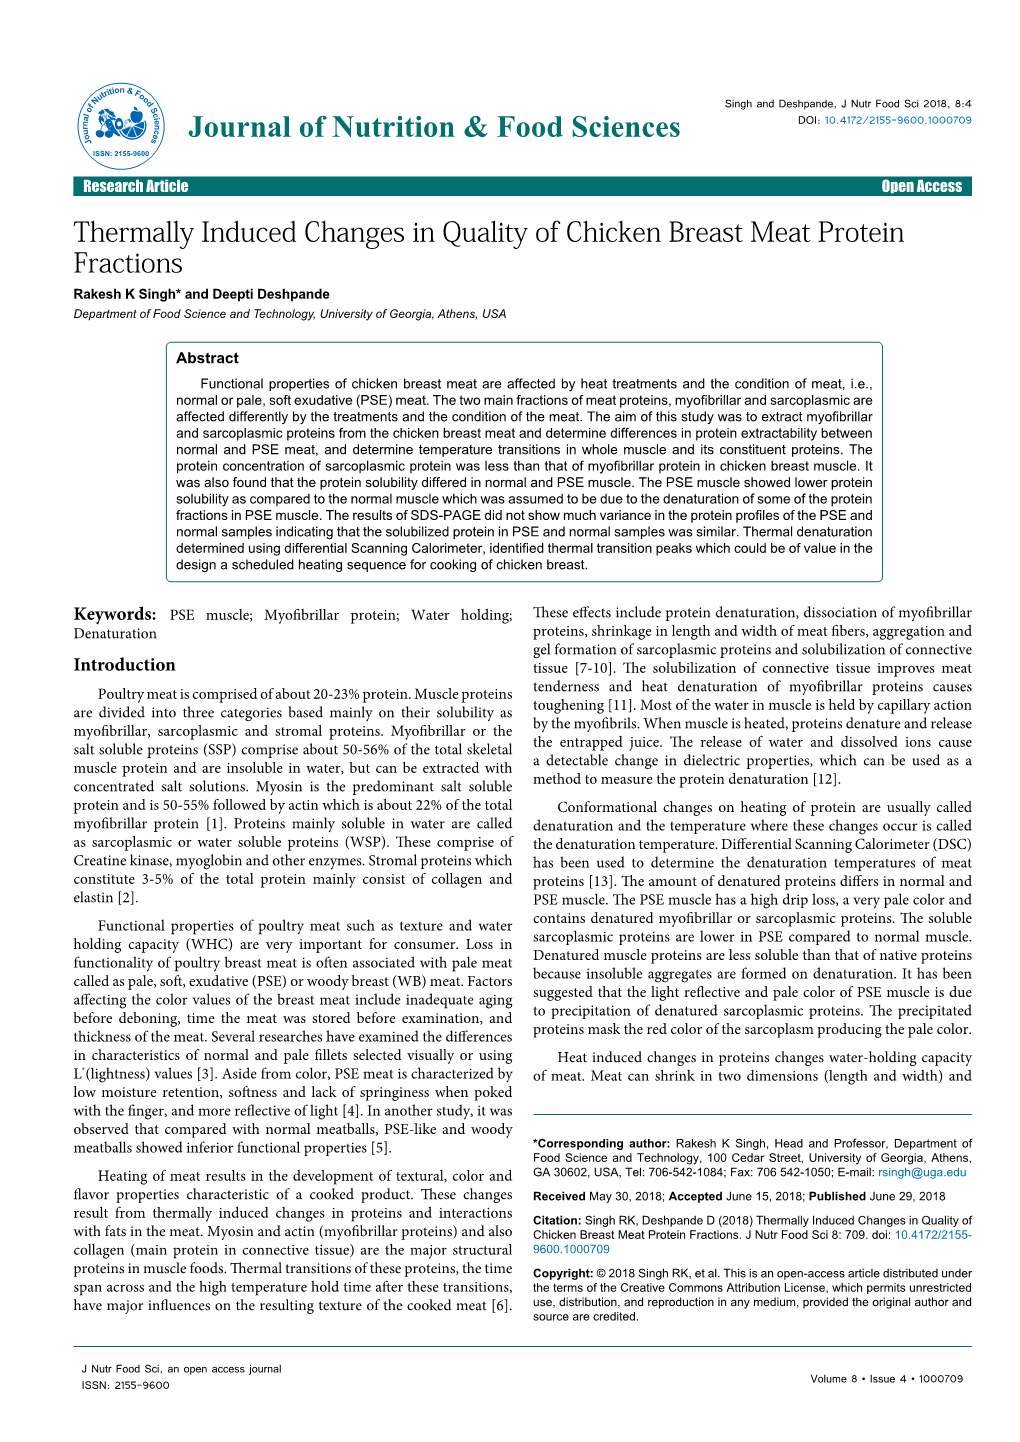 Thermally Induced Changes in Quality of Chicken Breast Meat Protein